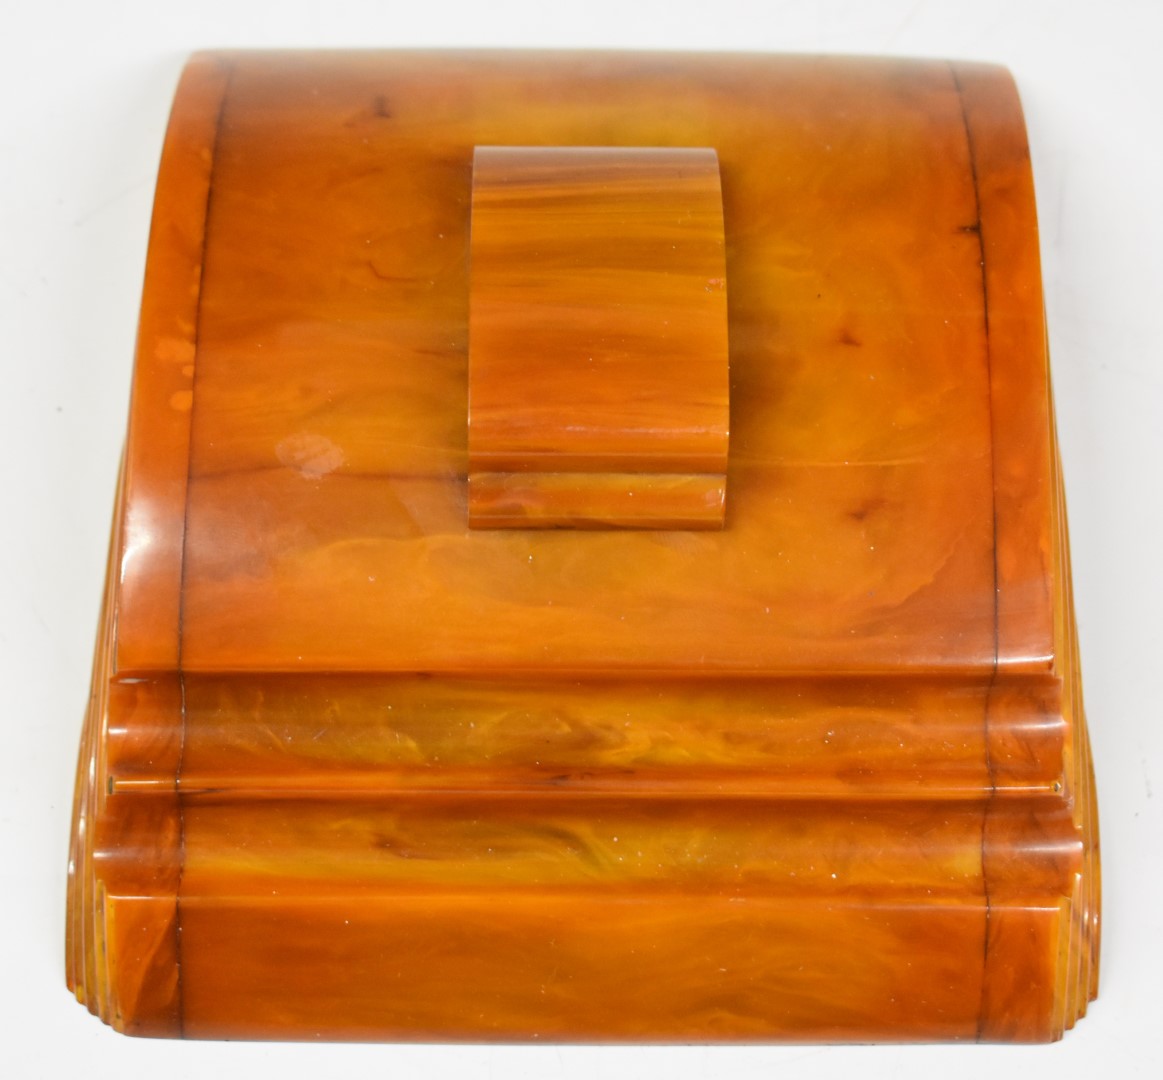 Cavacraft Art Deco Bakelite inkwell / standish with sliding cover in a faux amber effect finish,